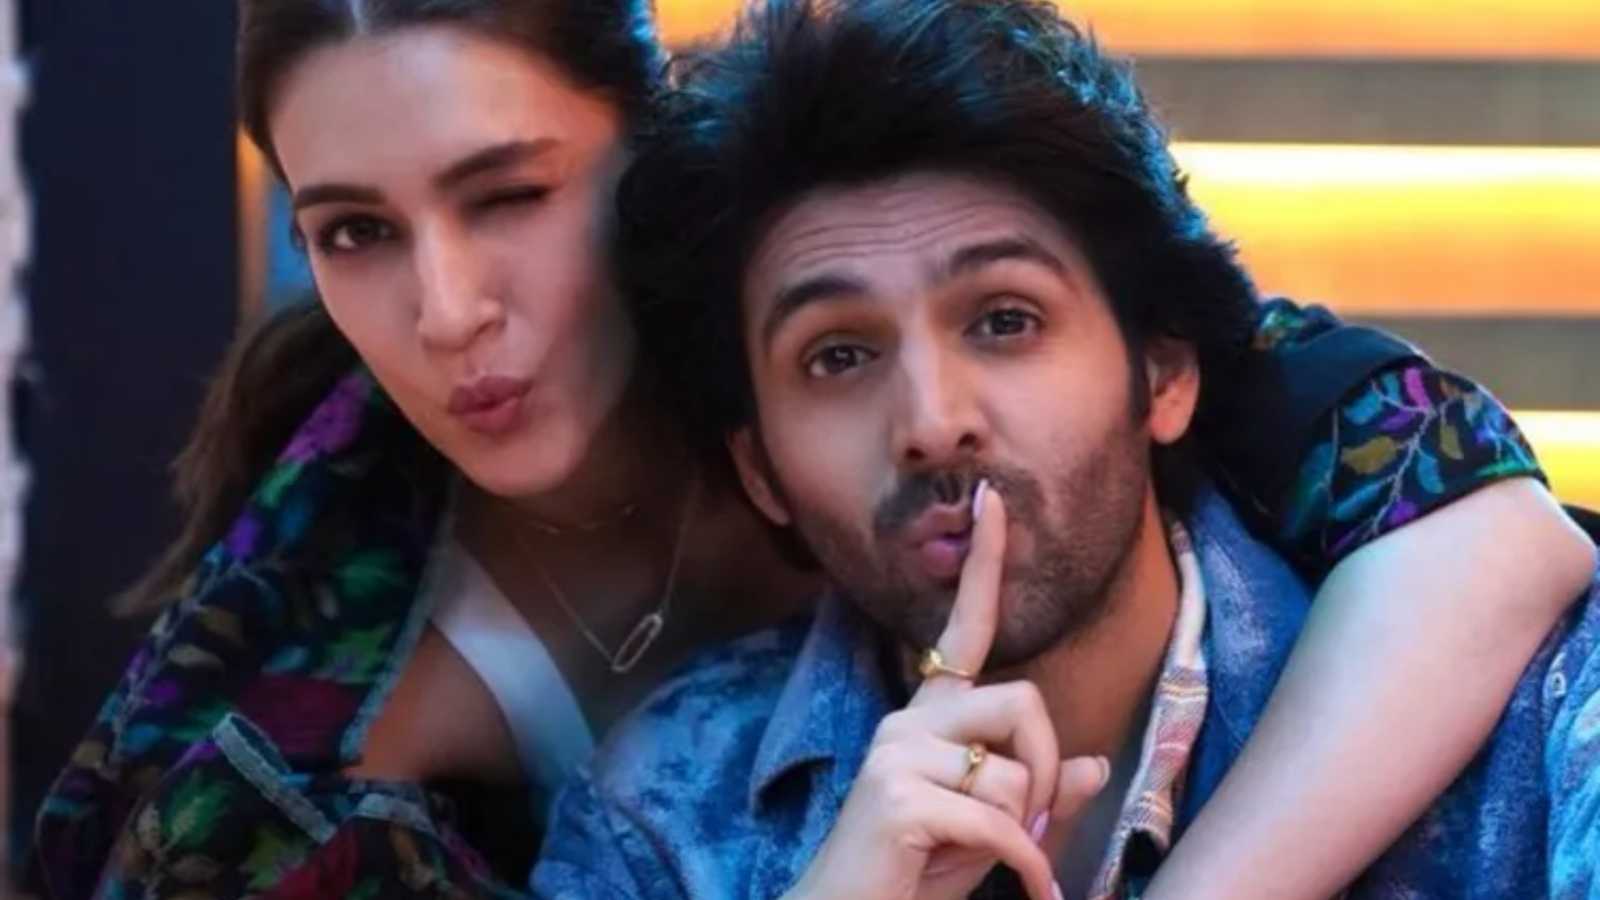 Kriti Sanon says she knows Kartik Aaryan inside out, what's brewing between the Shehzada co-stars?